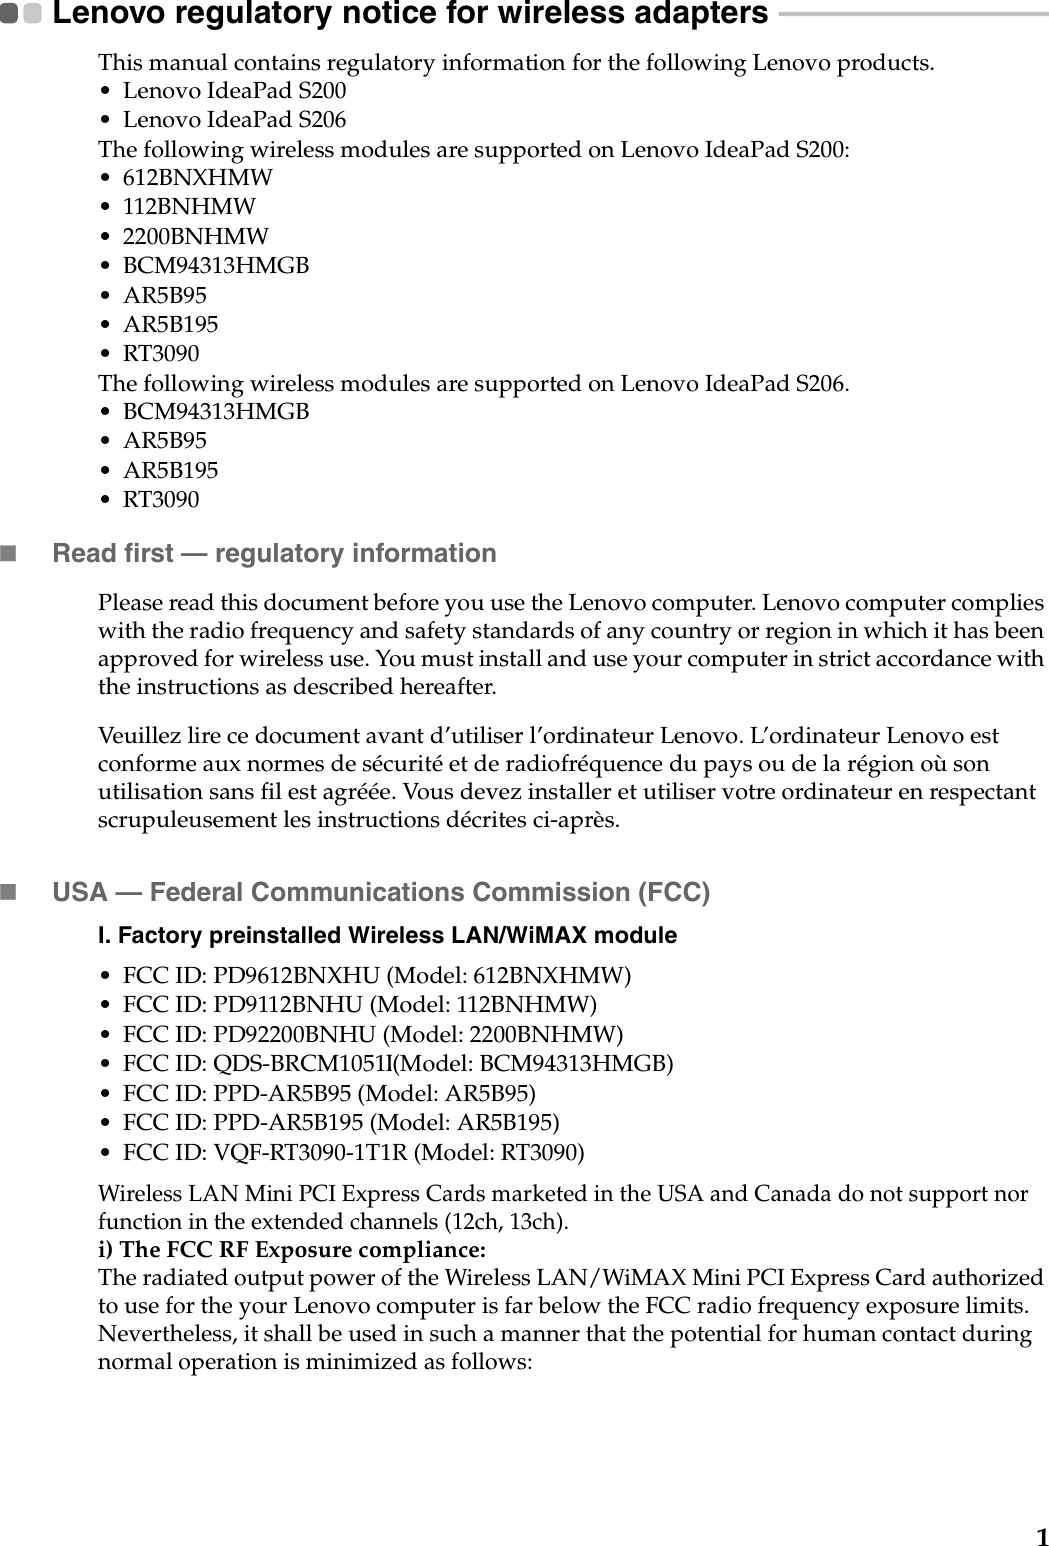 1Lenovo regulatory notice for wireless adapters  - - - - - - - - - - - - - - - - - - - - - - - - - - - - - - - - - - - - - - - -This manual contains regulatory information for the following Lenovo products.• Lenovo IdeaPad S200• Lenovo IdeaPad S206The following wireless modules are supported on Lenovo IdeaPad S200:•612BNXHMW• 112BNHMW• 2200BNHMW• BCM94313HMGB•AR5B95•AR5B195•RT3090The following wireless modules are supported on Lenovo IdeaPad S206.• BCM94313HMGB•AR5B95•AR5B195•RT3090Read first — regulatory informationPlease read this document before you use the Lenovo computer. Lenovo computer complies with the radio frequency and safety standards of any country or region in which it has been approved for wireless use. You must install and use your computer in strict accordance with the instructions as described hereafter. Veuillez lire ce document avant d’utiliser l’ordinateur Lenovo. L’ordinateur Lenovo est conforme aux normes de sécurité et de radiofréquence du pays ou de la région où son utilisation sans fil est agréée. Vous devez installer et utiliser votre ordinateur en respectant scrupuleusement les instructions décrites ci-après.USA — Federal Communications Commission (FCC) I. Factory preinstalled Wireless LAN/WiMAX module • FCC ID: PD9612BNXHU (Model: 612BNXHMW)• FCC ID: PD9112BNHU (Model: 112BNHMW)• FCC ID: PD92200BNHU (Model: 2200BNHMW)• FCC ID: QDS-BRCM1051 (Model: BCM94313HMGB)• FCC ID: PPD-AR5B95 (Model: AR5B95)• FCC ID: PPD-AR5B195 (Model: AR5B195)• FCC ID: VQF-RT3090-1T1R (Model: RT3090)Wireless LAN Mini PCI Express Cards marketed in the USA and Canada do not support nor function in the extended channels (12ch, 13ch). i) The FCC RF Exposure compliance:The radiated output power of the Wireless LAN/WiMAX Mini PCI Express Card authorized to use for the your Lenovo computer is far below the FCC radio frequency exposure limits. Nevertheless, it shall be used in such a manner that the potential for human contact during normal operation is minimized as follows:,